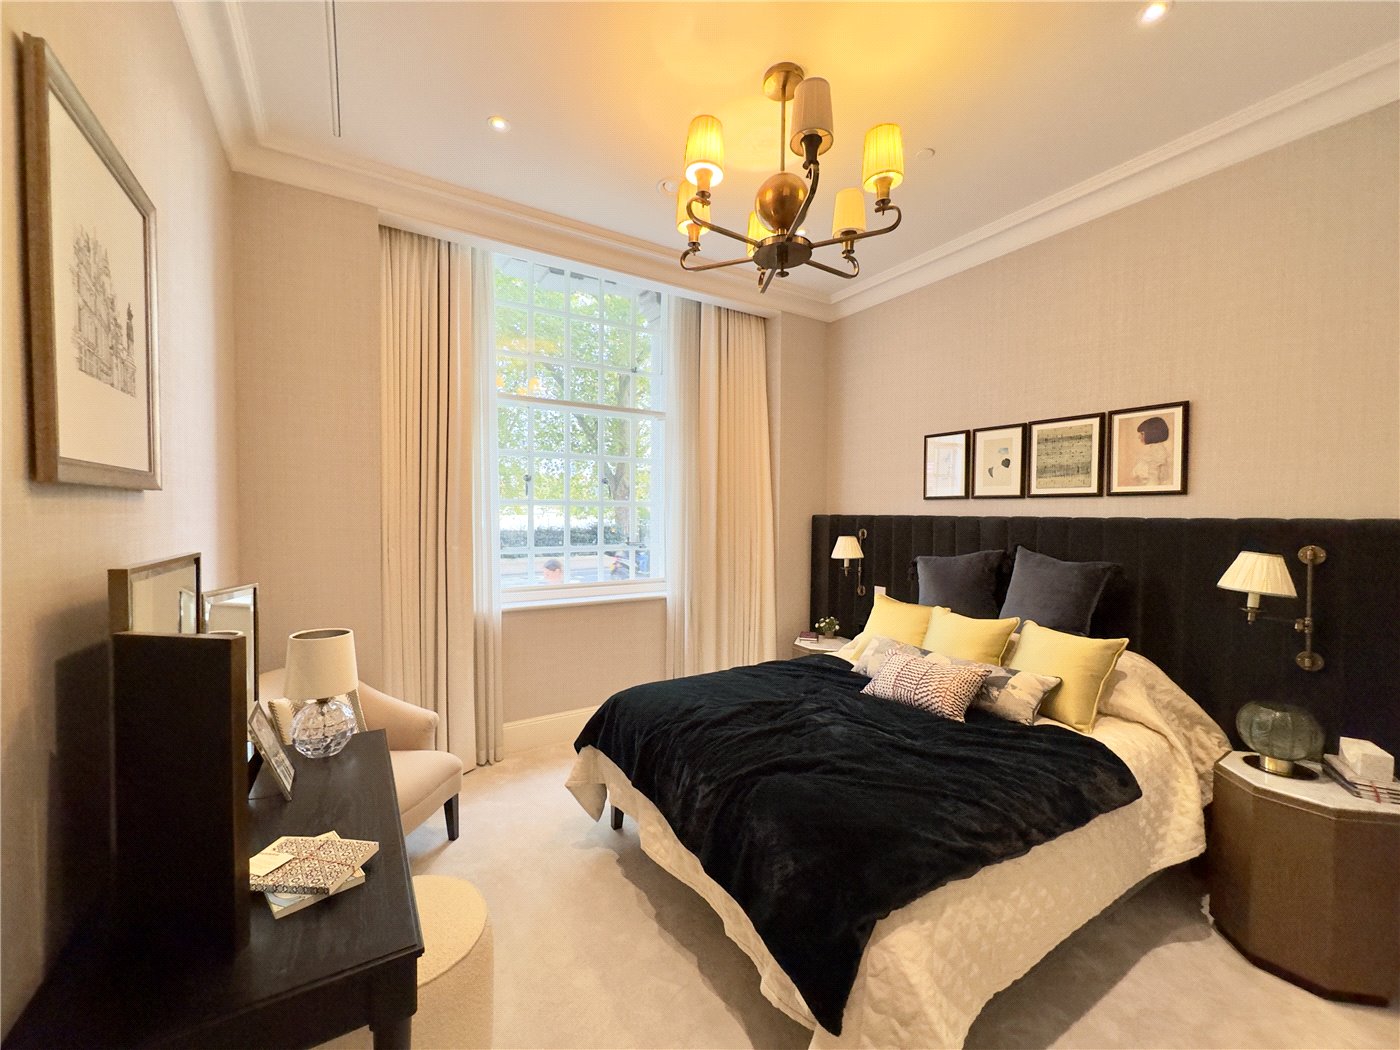 Apartment 2, 9 Millbank Residences, Westminster, Londonm, SW1P